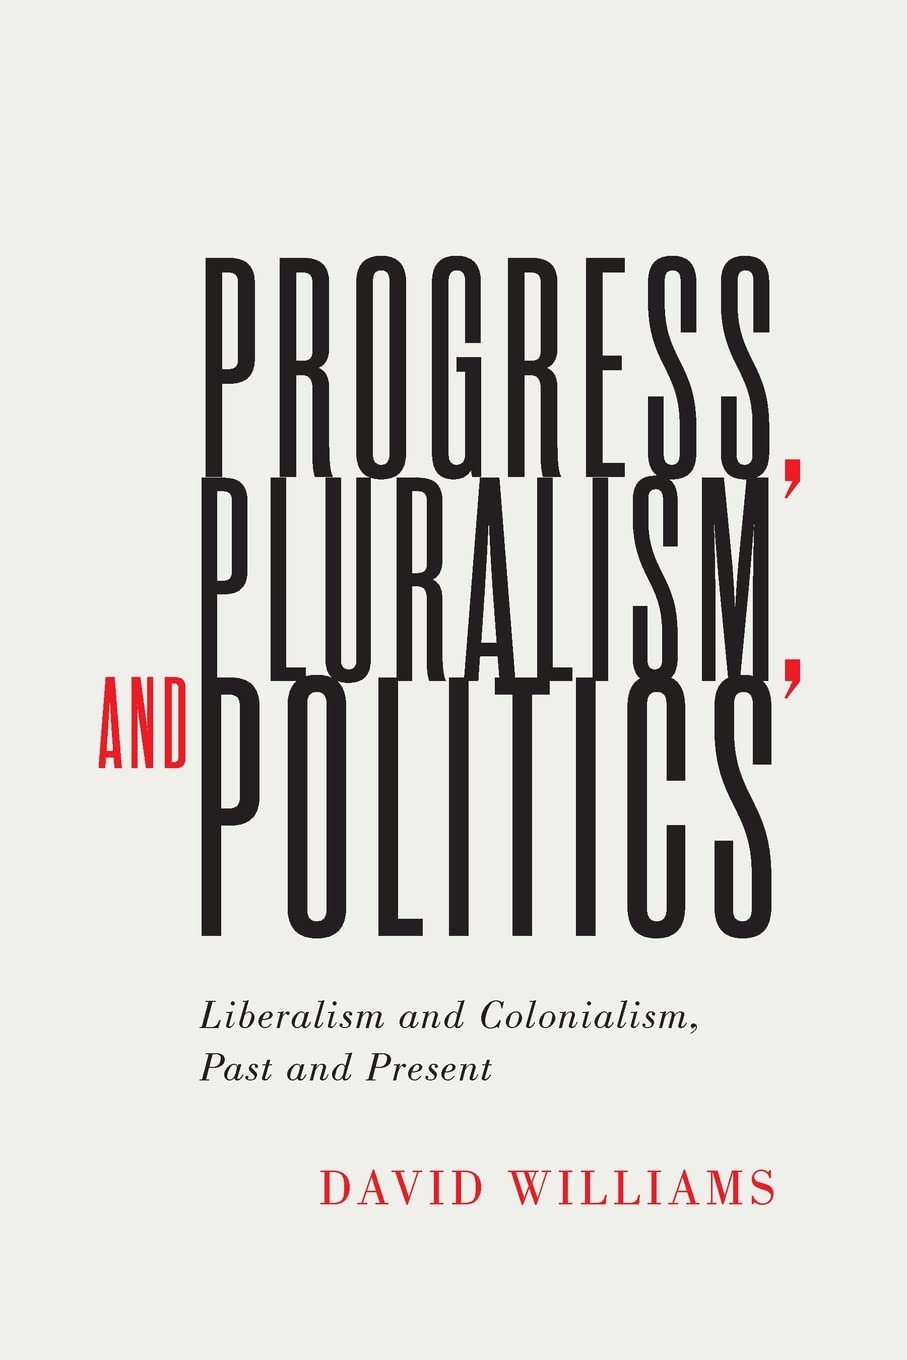 We're delighted to host the launch of David William's new latest 'Progress, Pluralism, and Politics: Liberalism and Colonialism, Past and Present'.